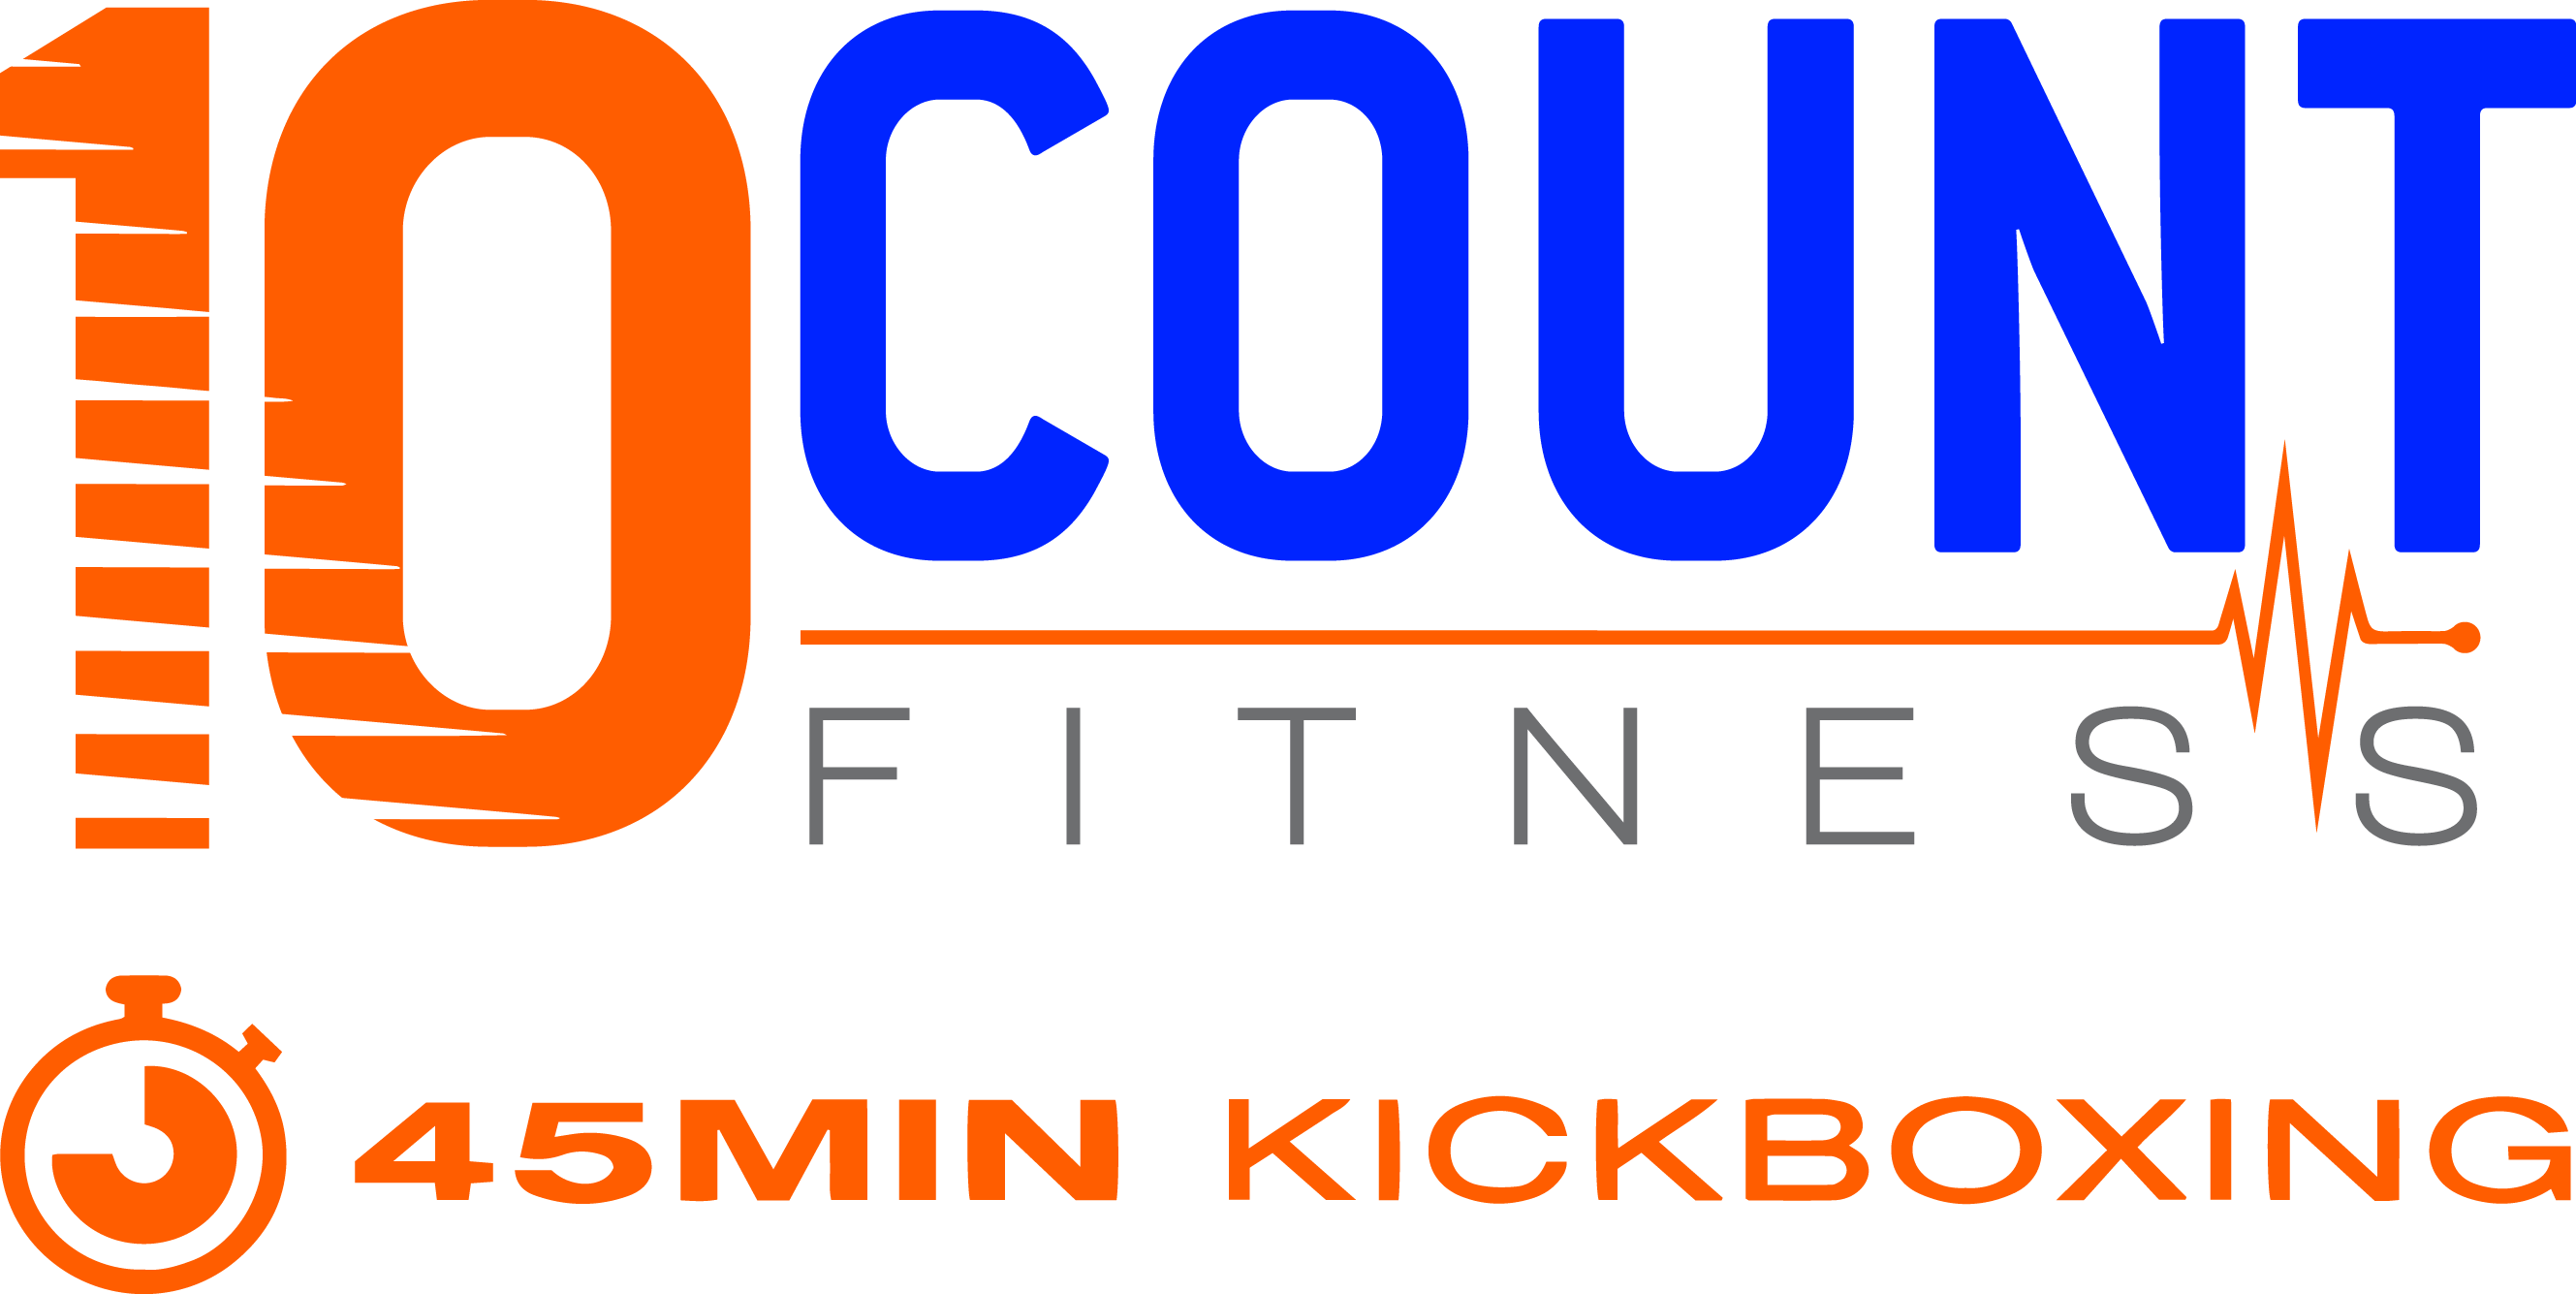 Orange and blue texts show the 10 count fitness in 45 min kickboxing logo